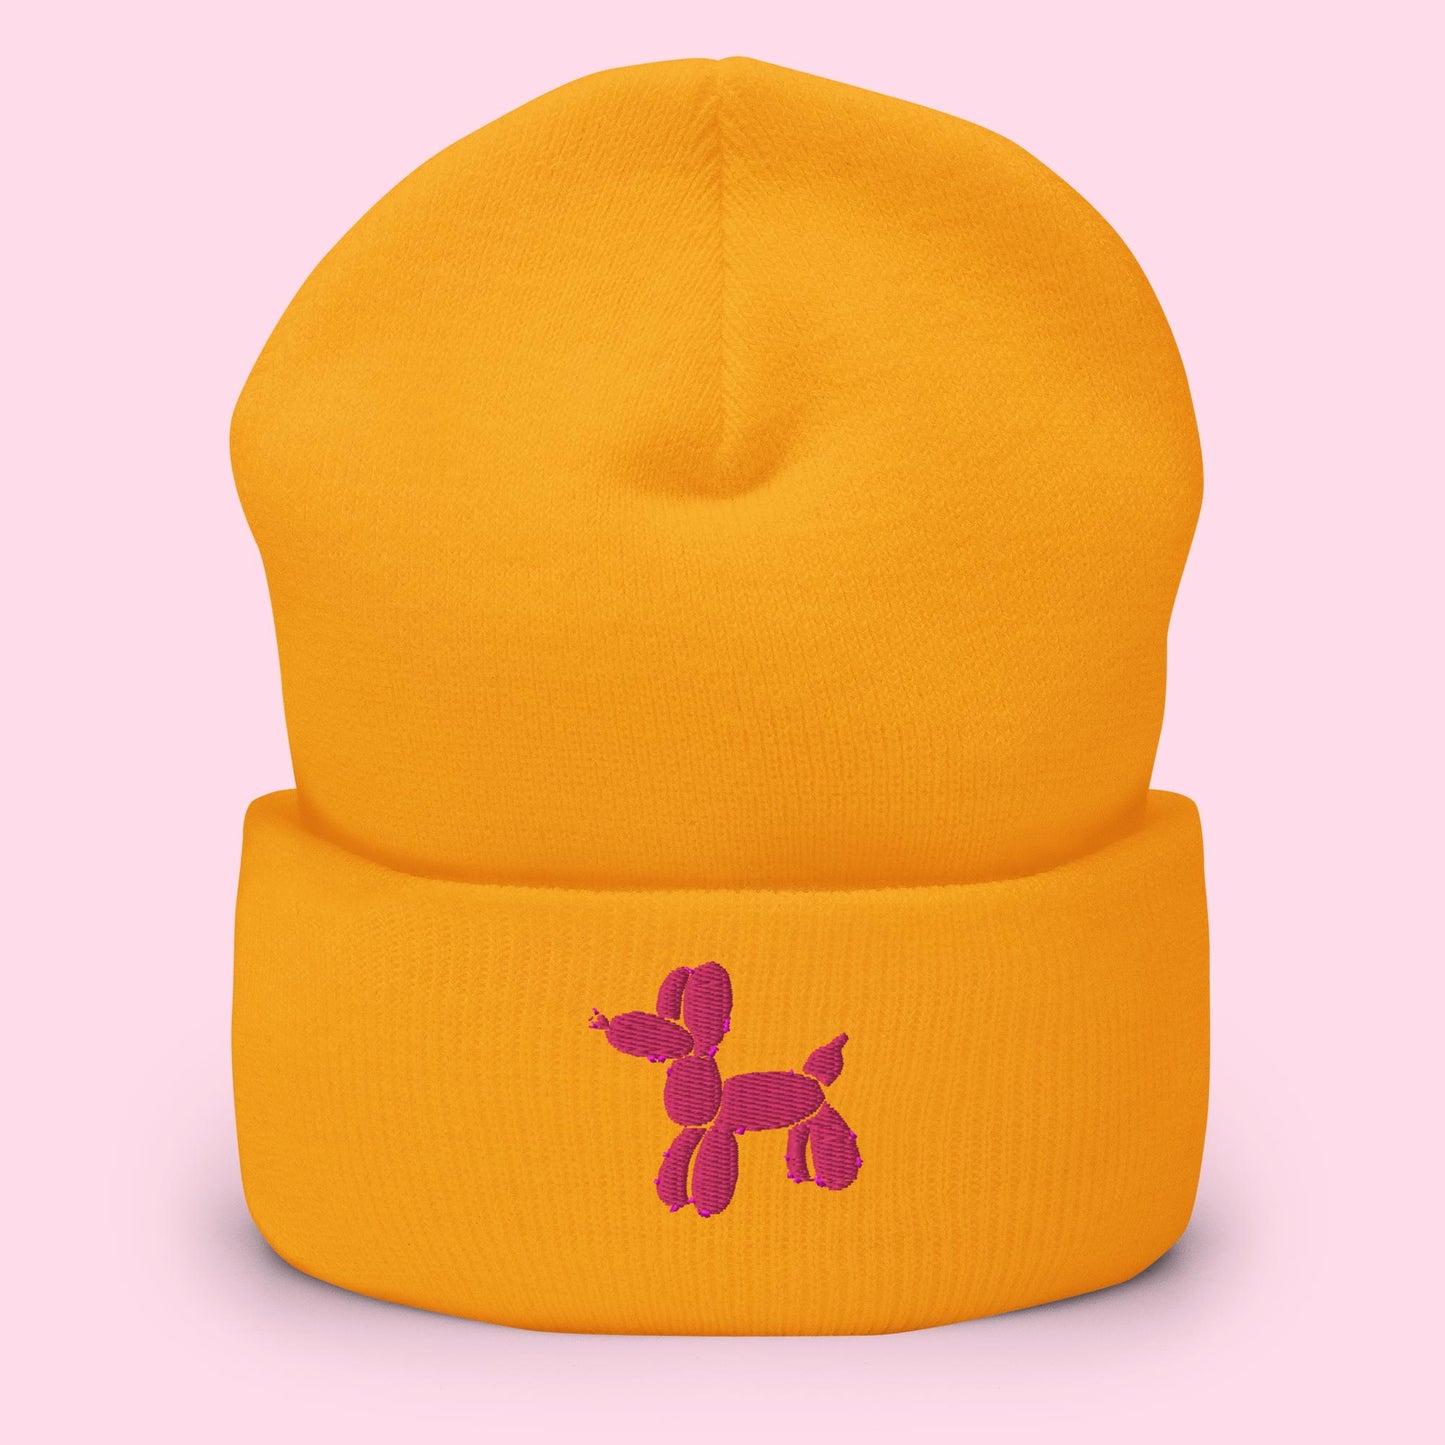 Balloon dog beanie - sunflower yellow with pink embroidery